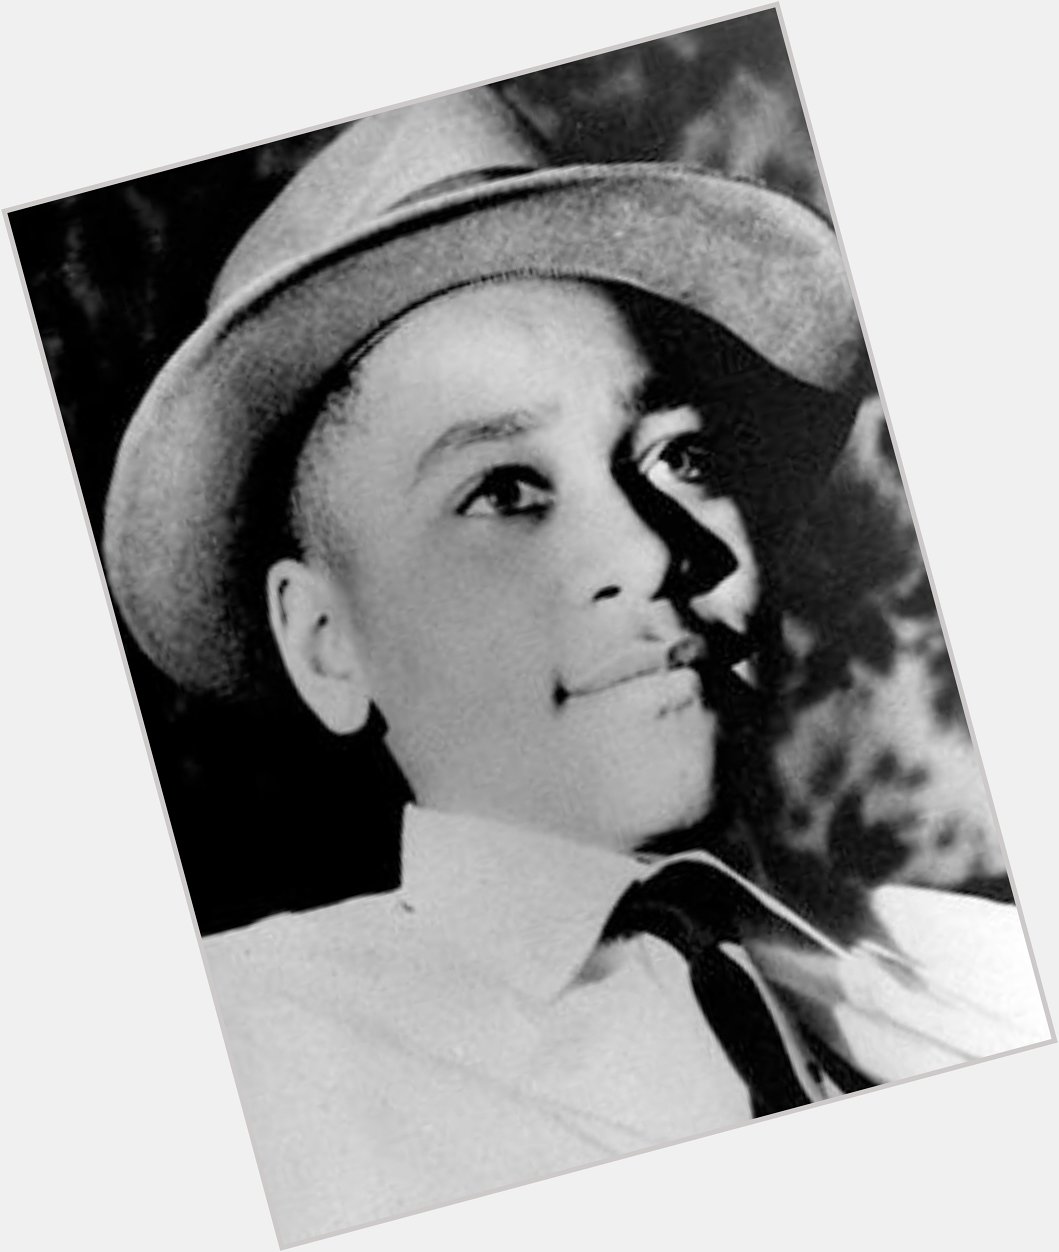 Happy Birthday to Emmett Till who would have been 79 years old 